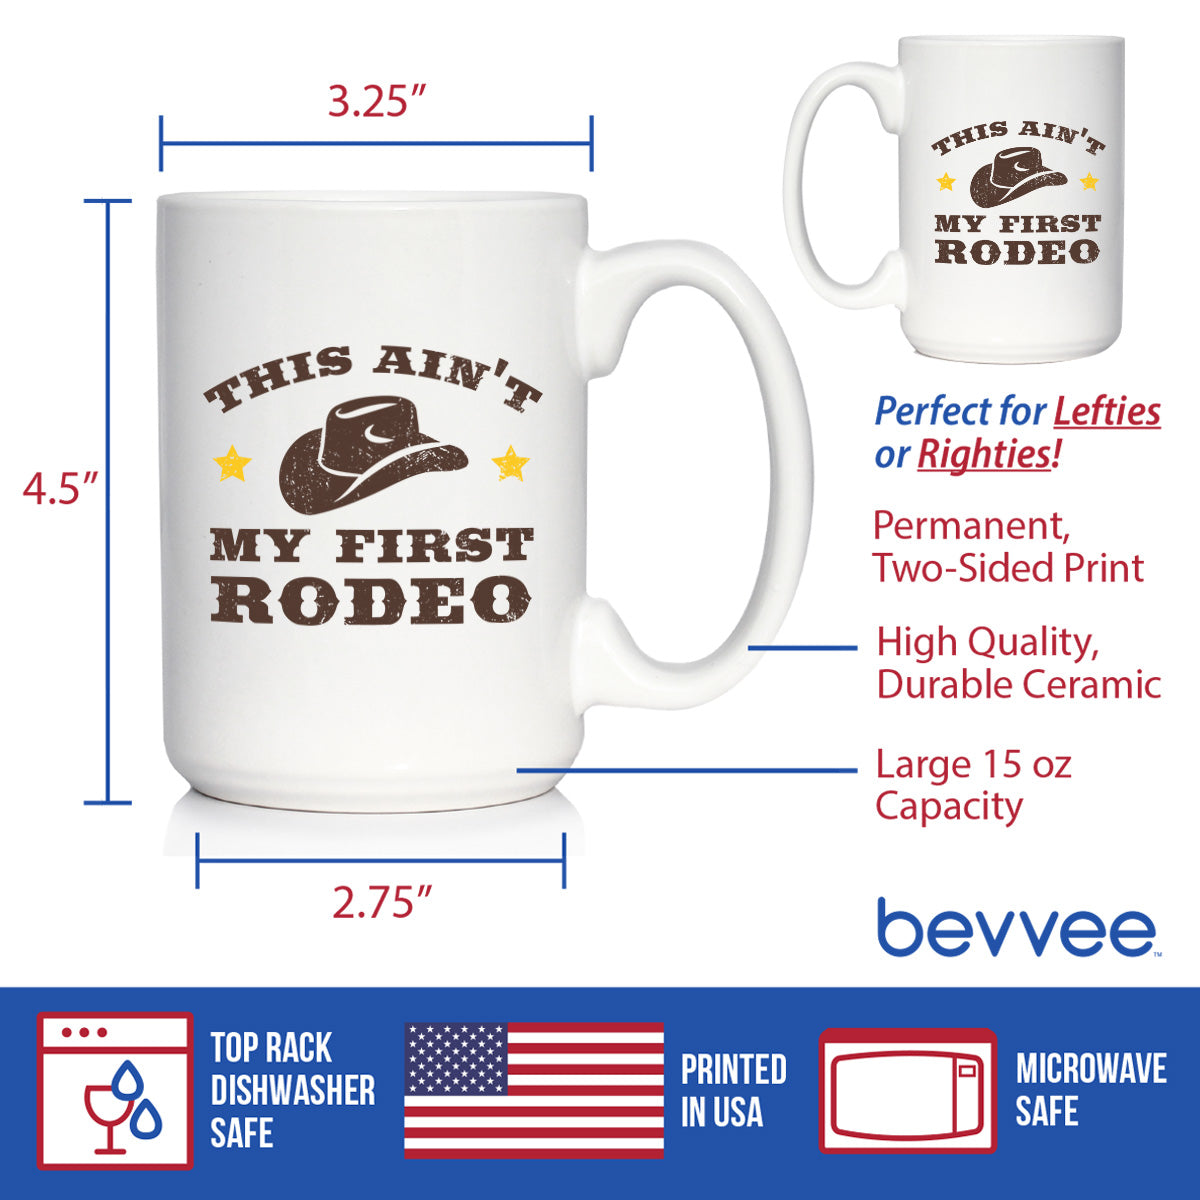 Ain&#39;t My First Rodeo Coffee Mug - Funny Cowboy or Cowgirl Gifts for Men &amp; Women - Fun Unique Party Decor Cup